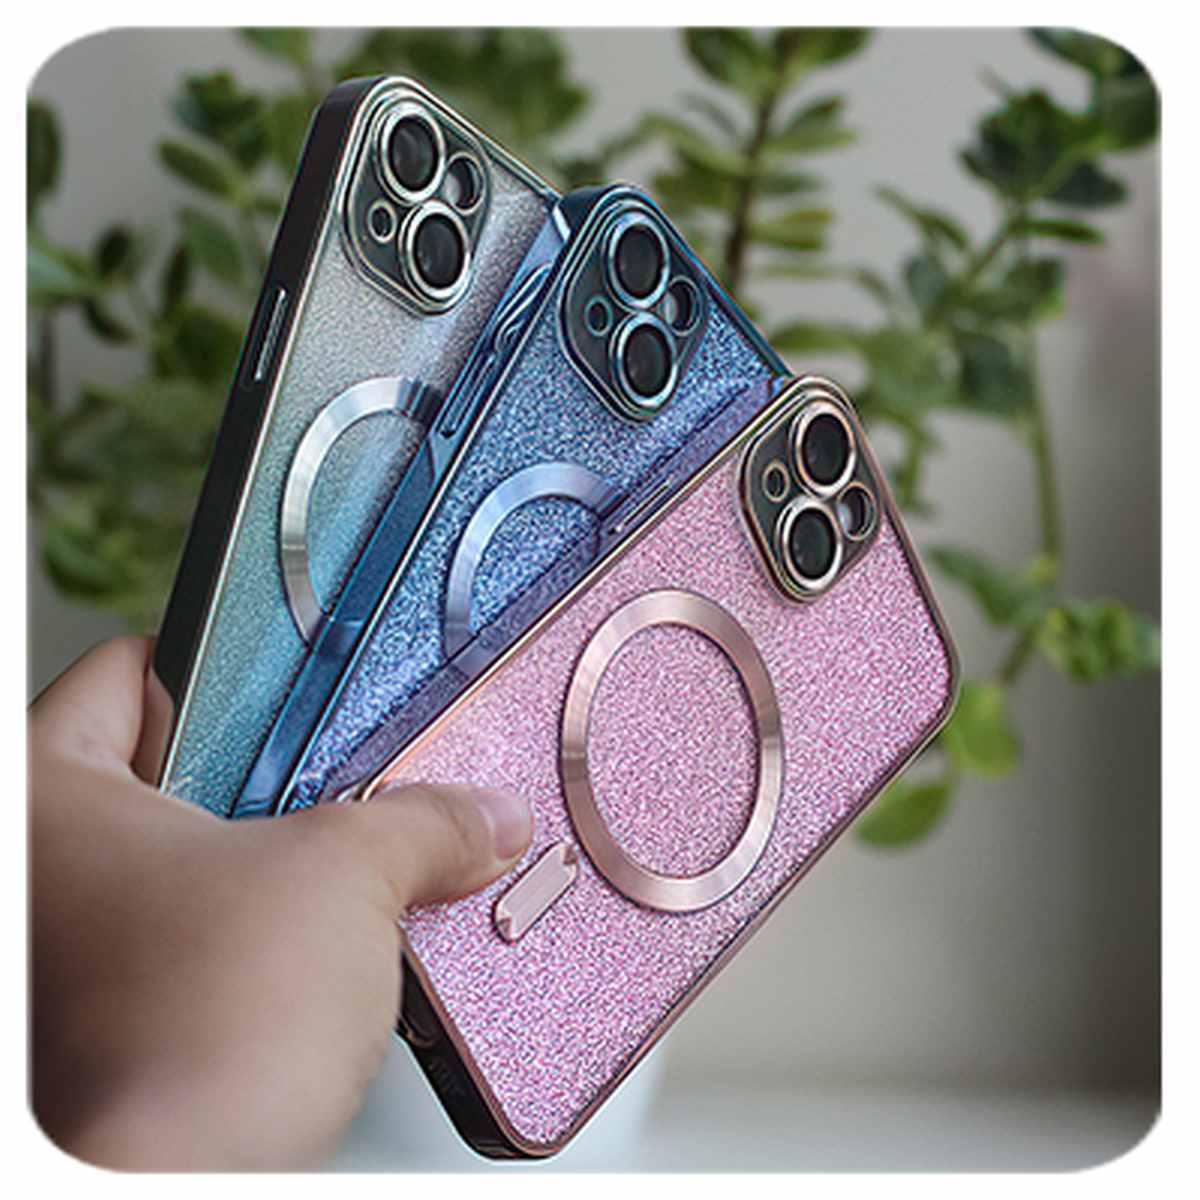 GLITTER CHROME MAG CASE FOR IPHONE PRO 12  6,1" SILVER